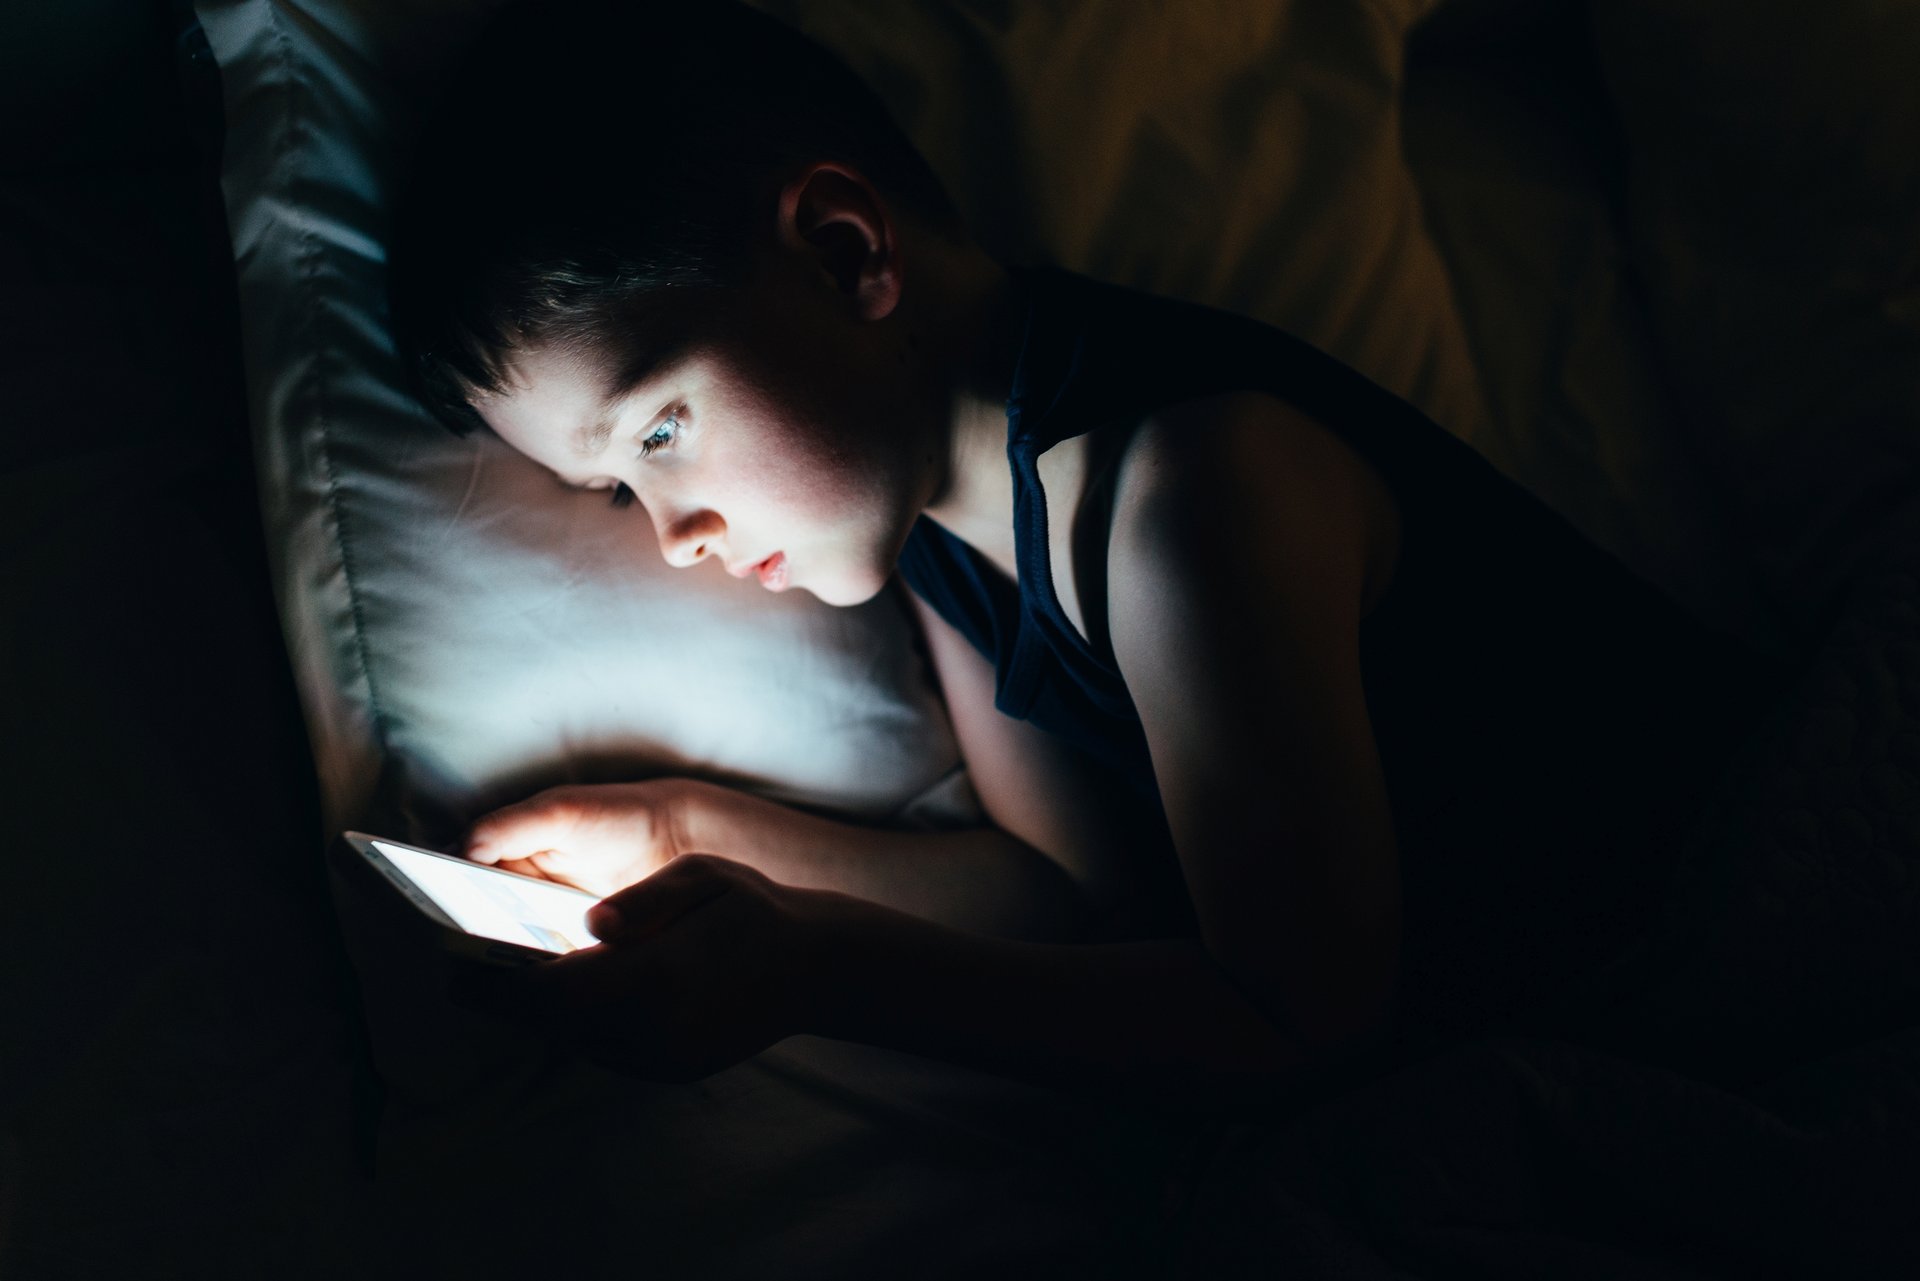 Boy on cellphone in bed.